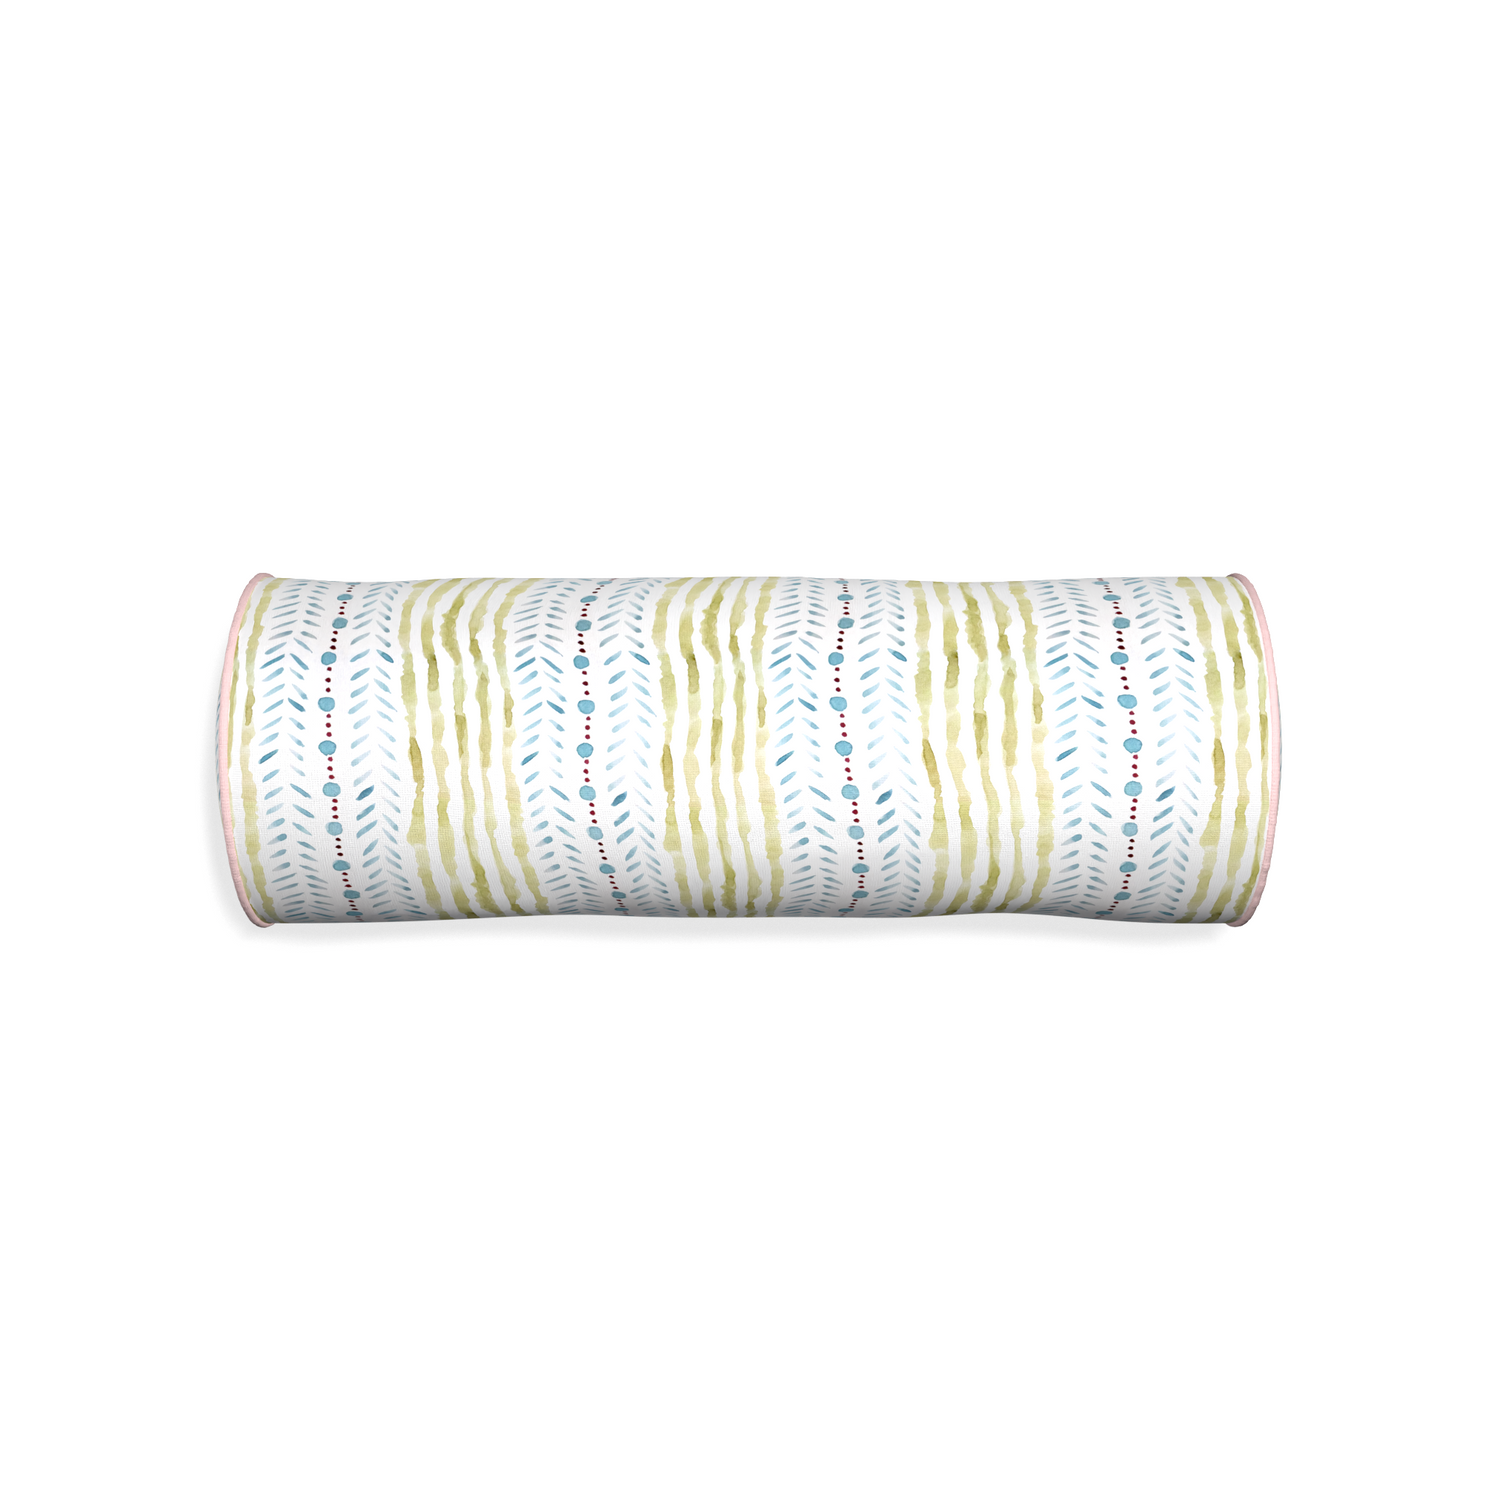 Bolster julia custom blue & green stripedpillow with petal piping on white background